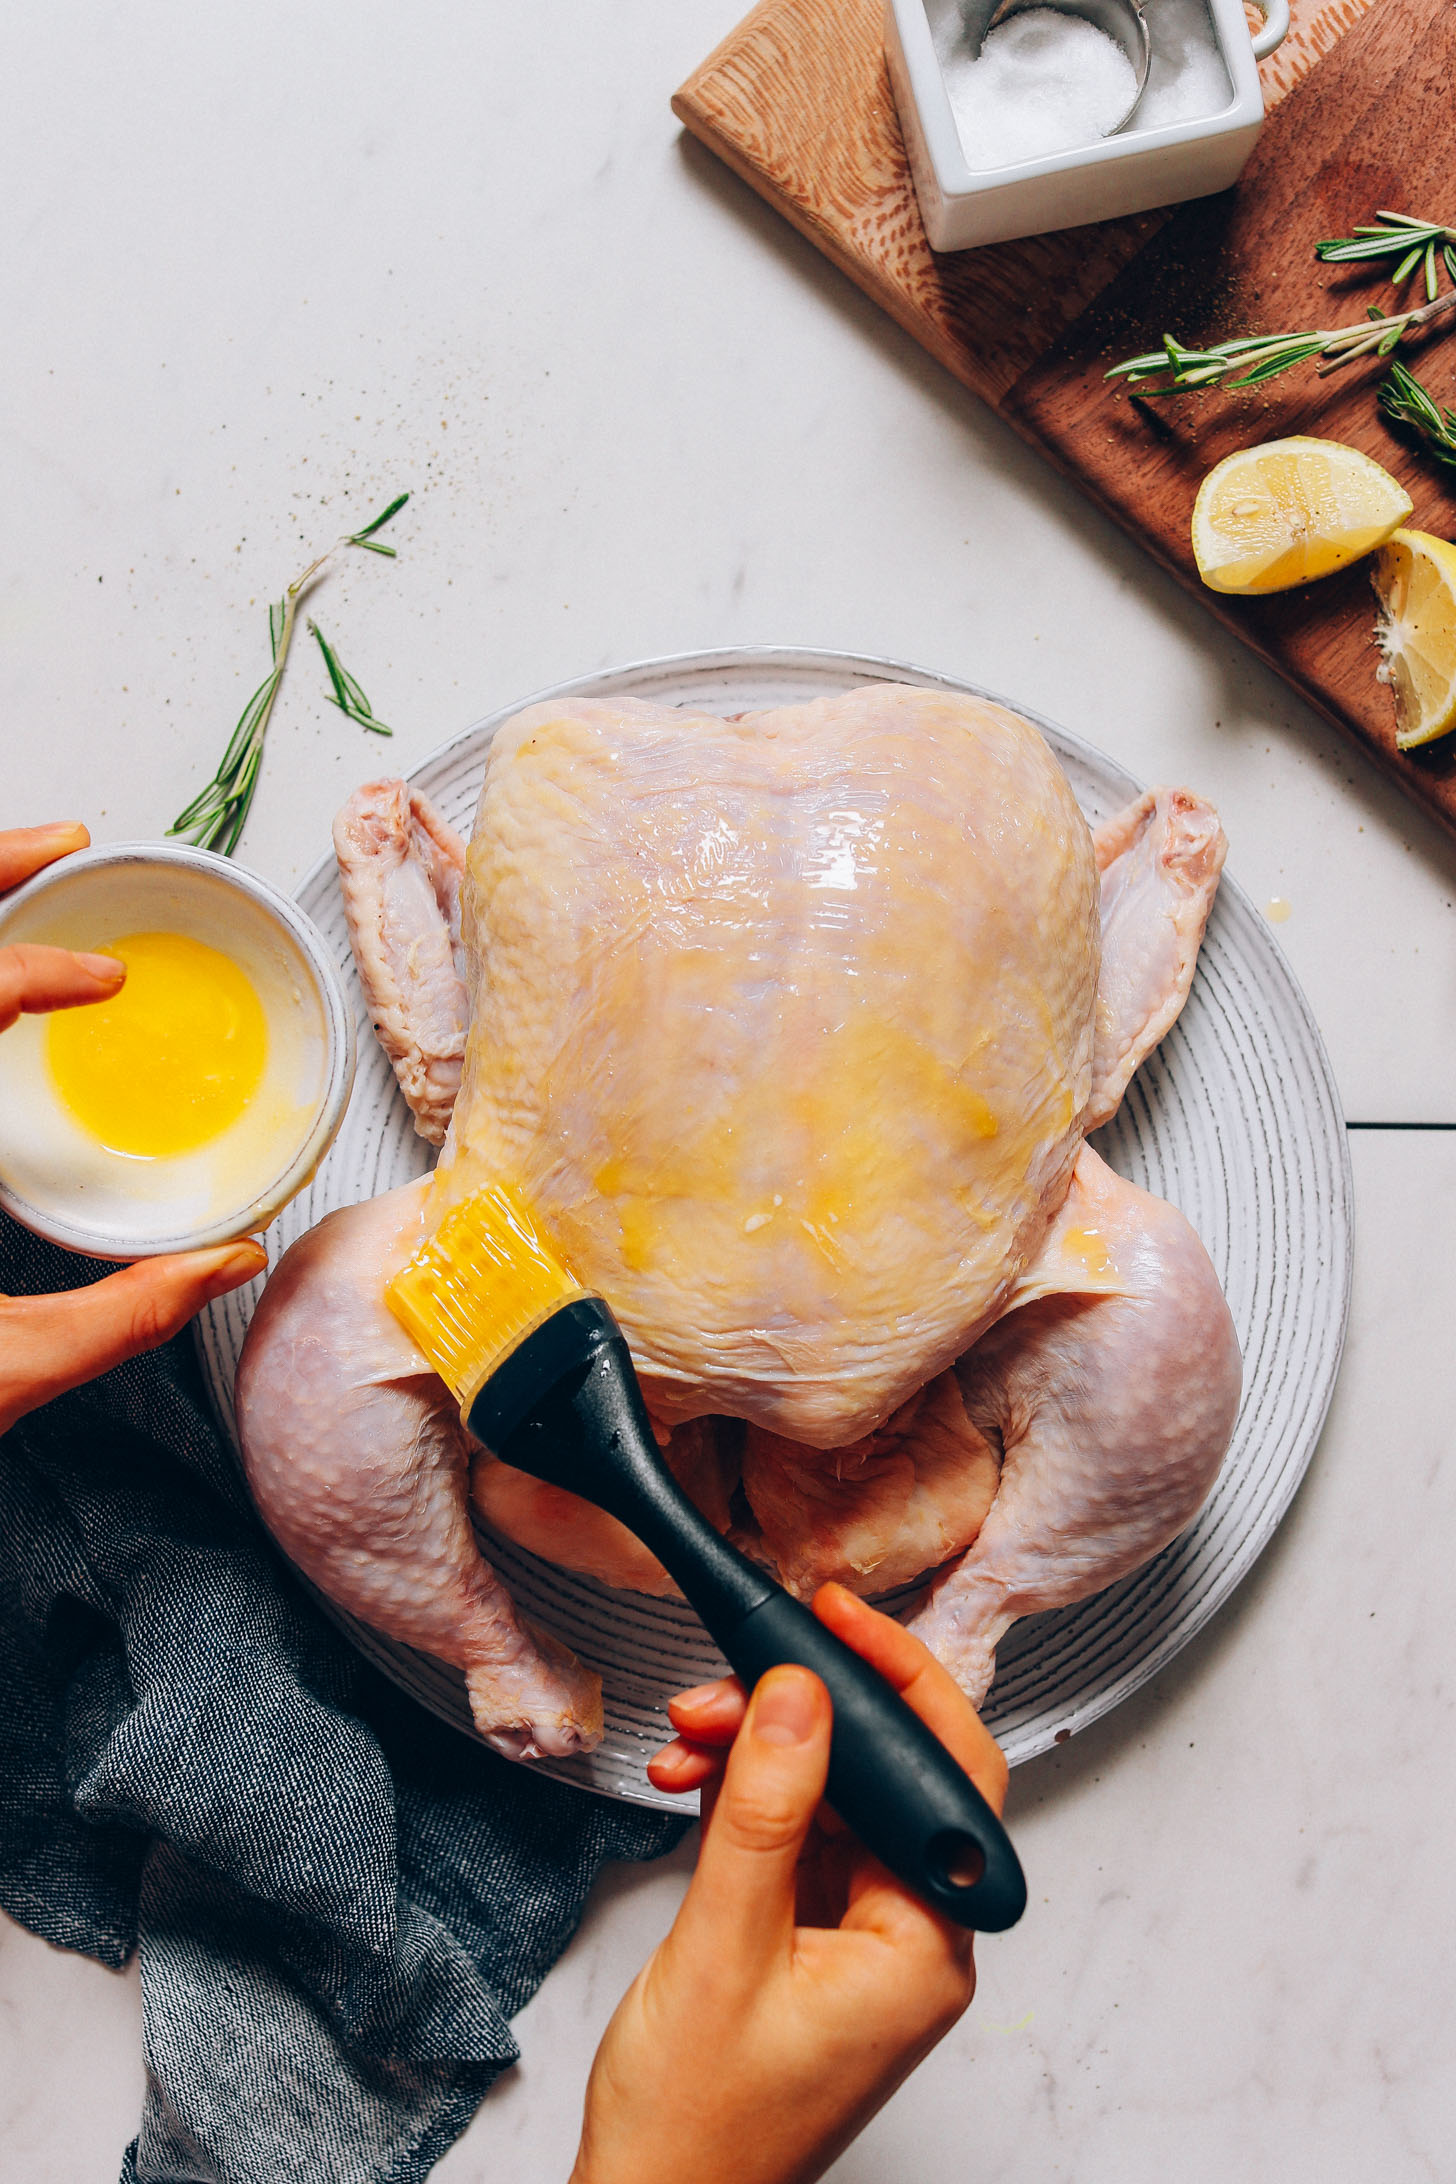 Brushing butter onto the skin of a chicken to make our crispy skin Roasted Chicken recipe